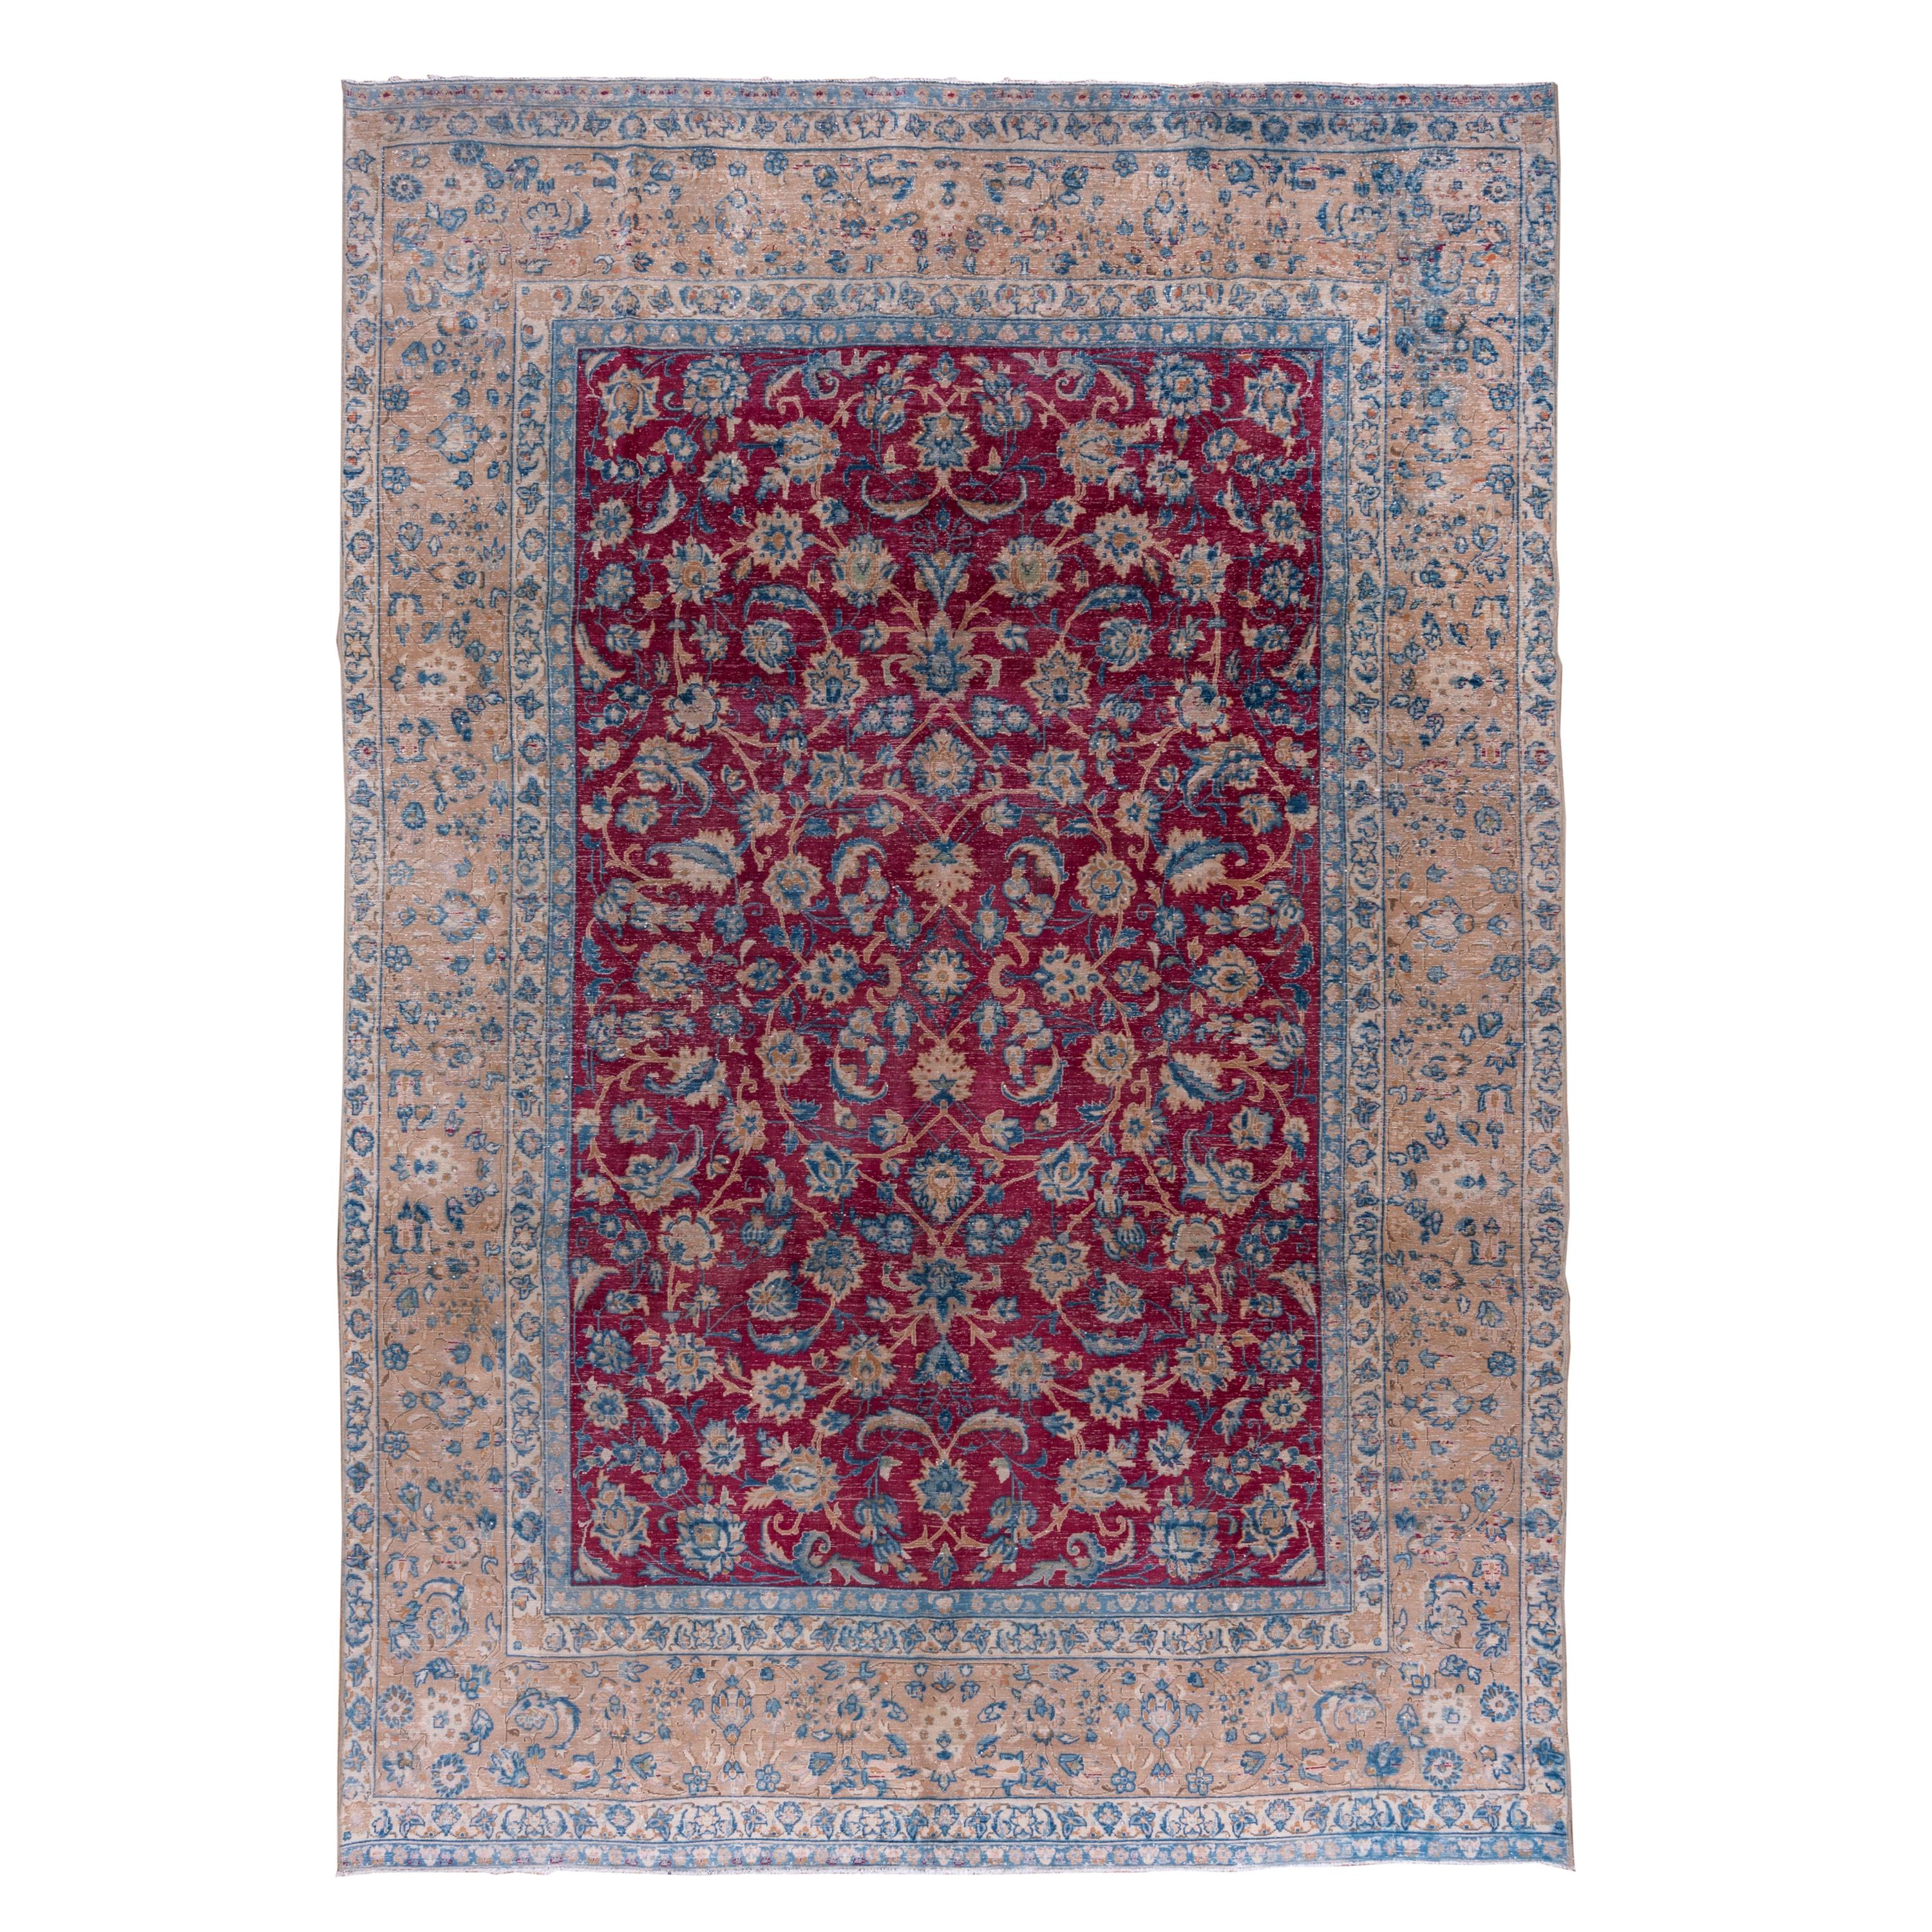 Antique Tabriz Rug, Bright Raspberry Allover Field, Baby Blue and Peach Borders For Sale